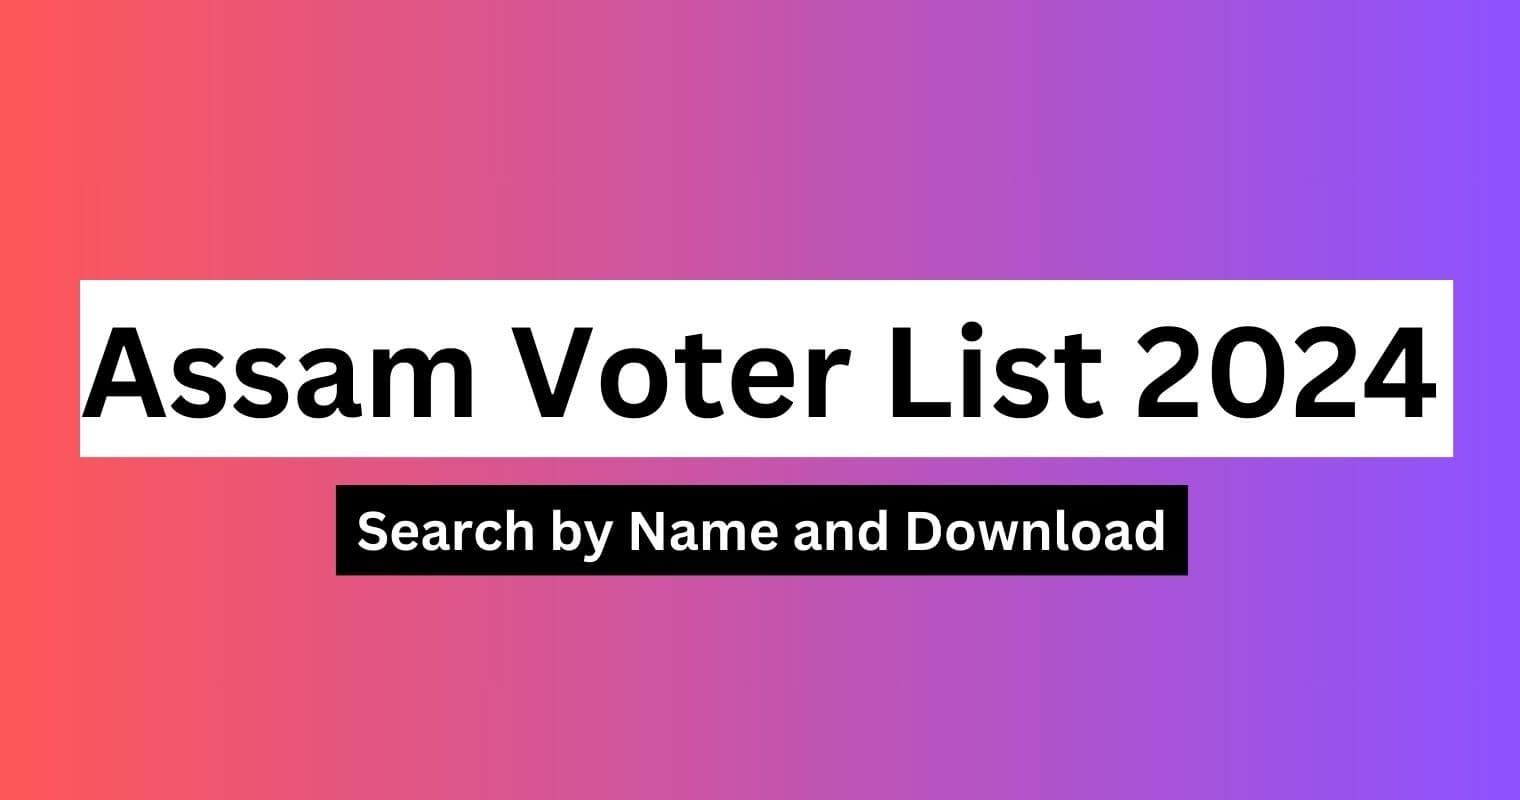 Search By Name in Assam Voter List